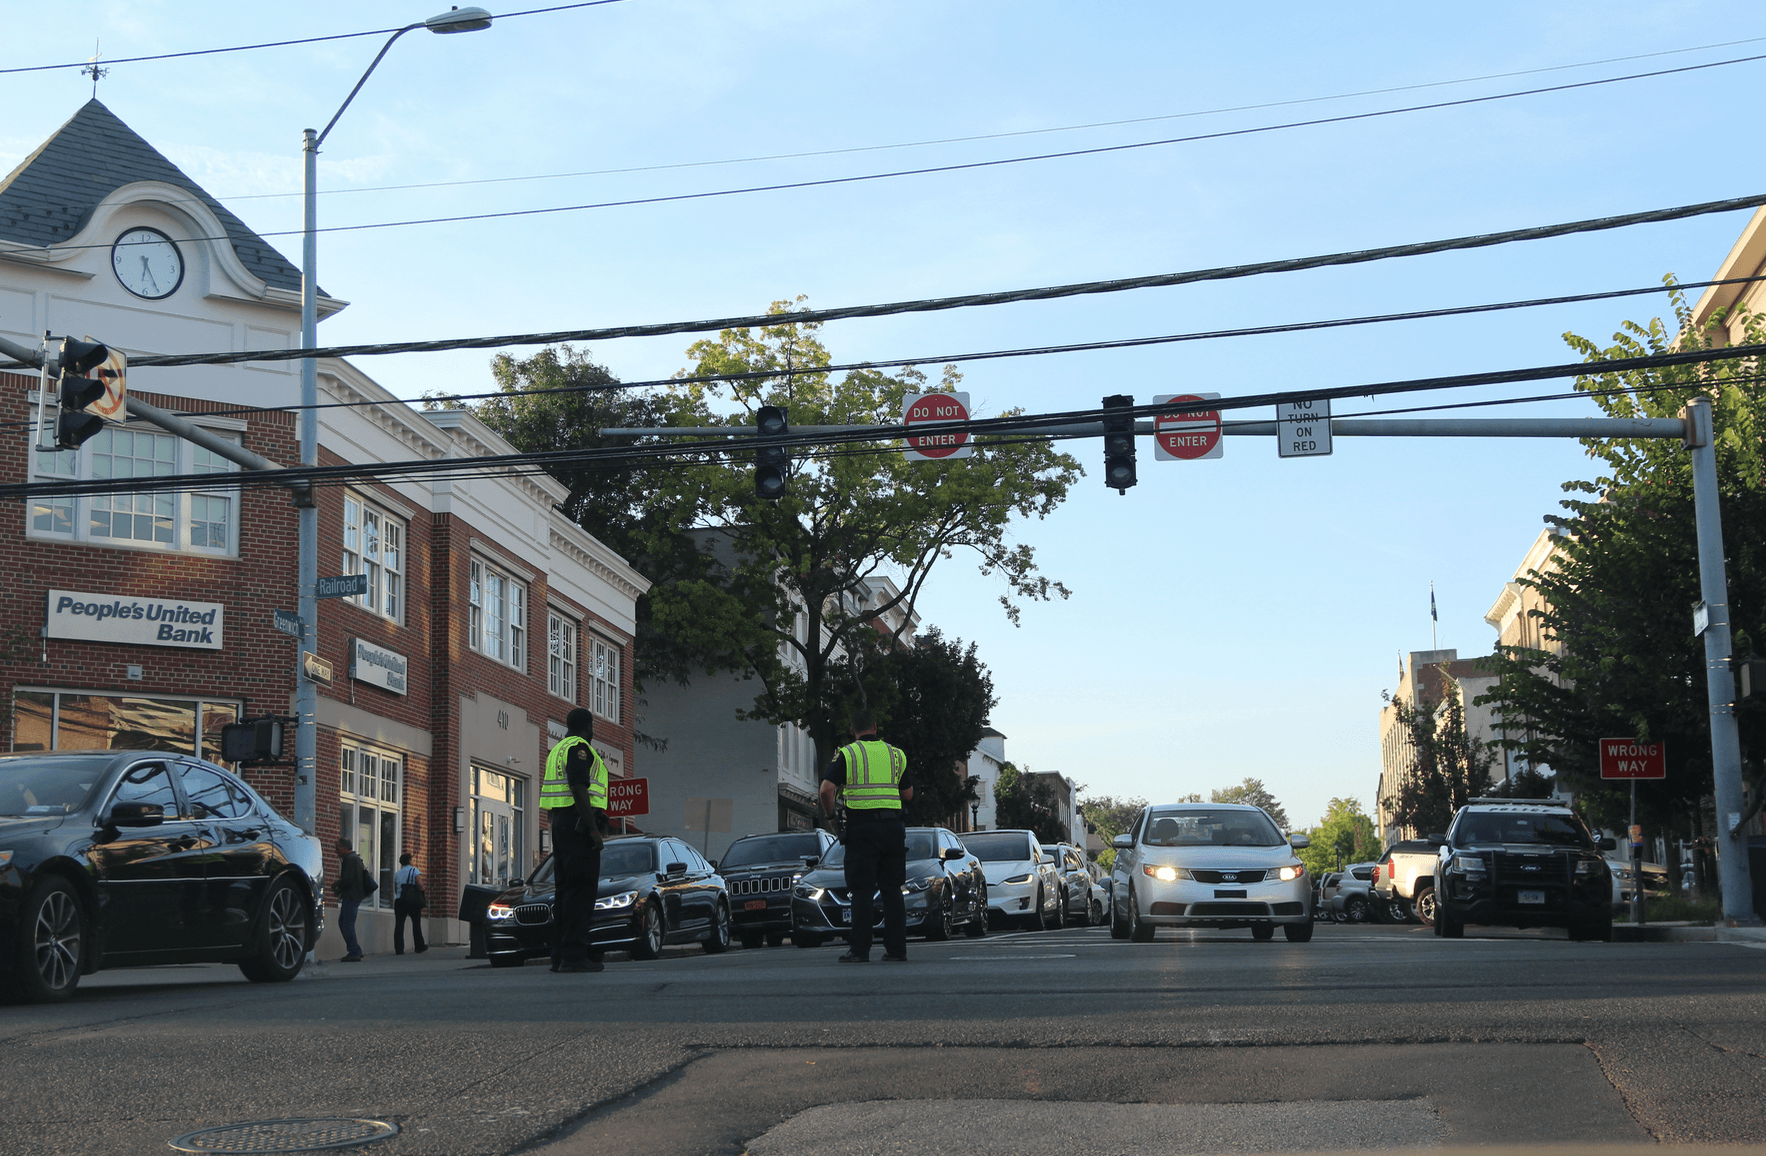 At the bottom of Greenwich Avenue at the intersection of Railroad Ave and Steamboat Road, the traffic light. Police are directing traffic which is jammed with commuters.